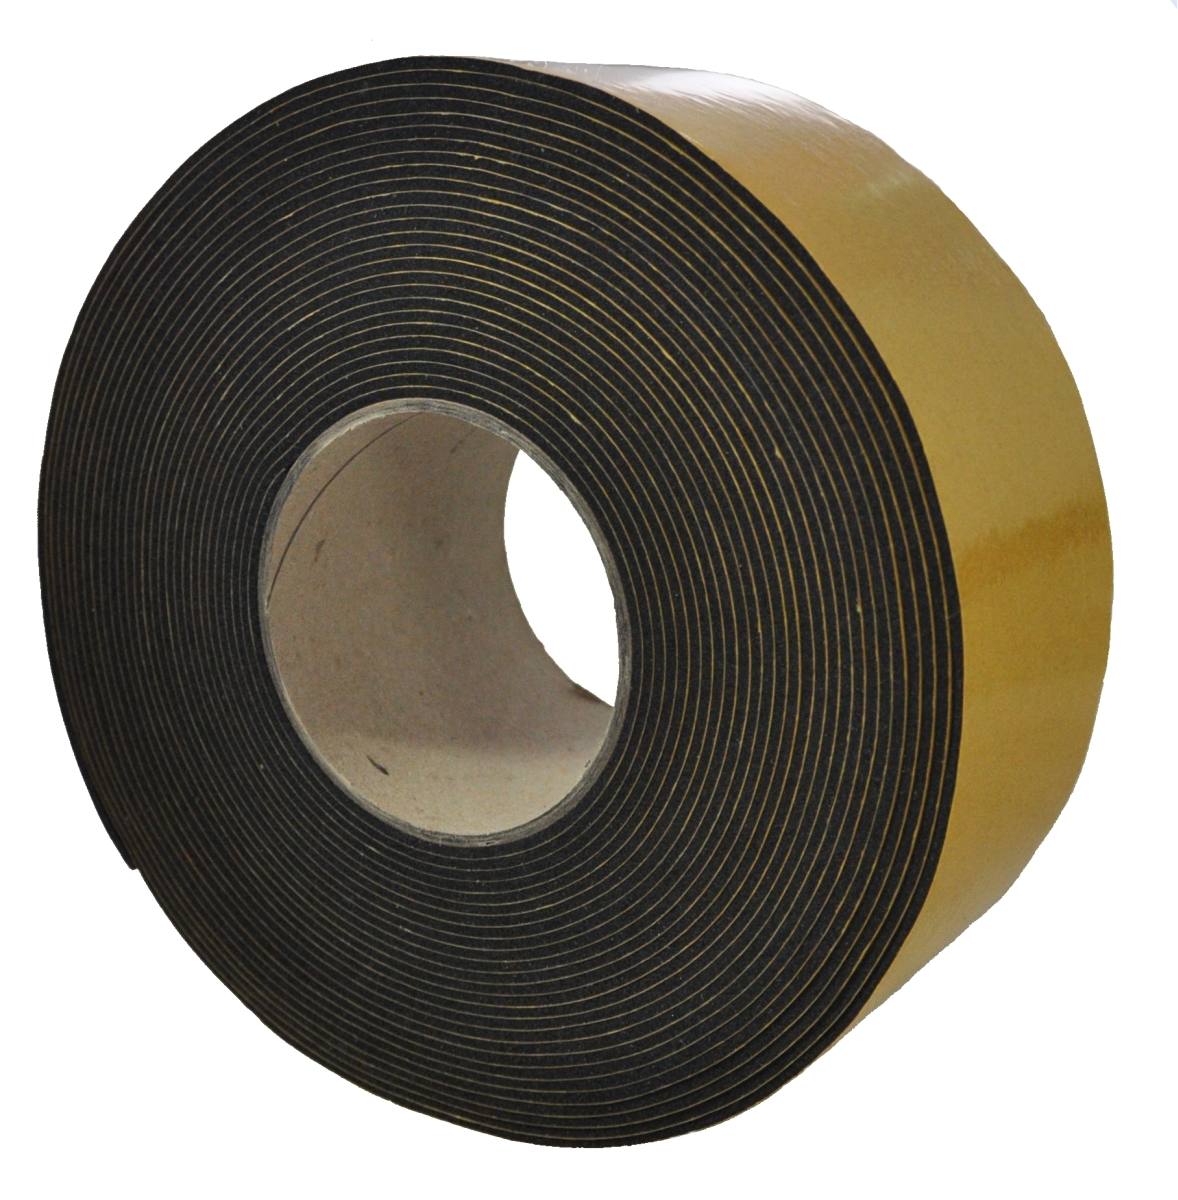 S-K-S EPDM 2mmx38mmx10m black self-adhesive on one side